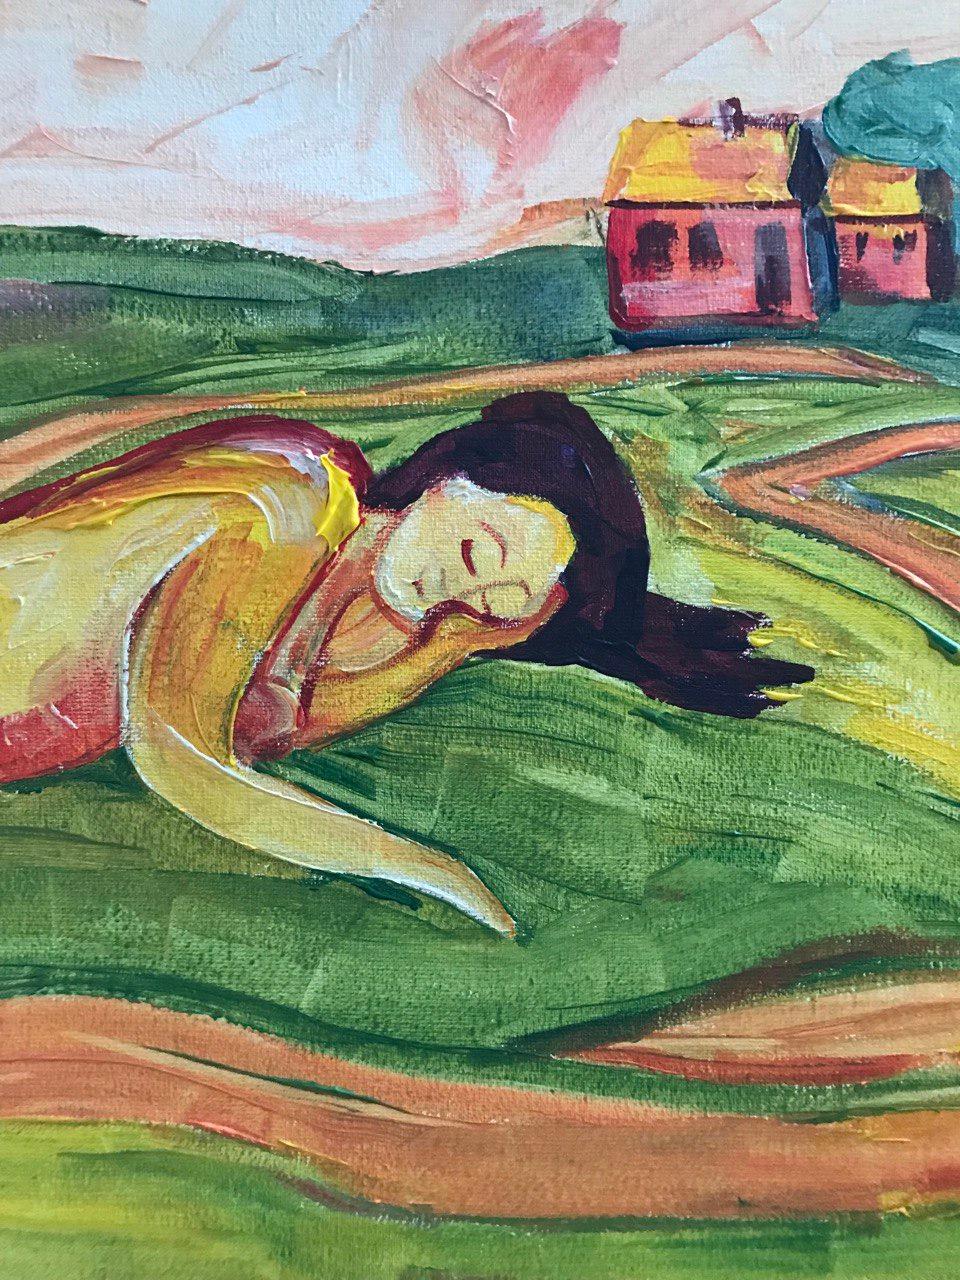  In this mesmerizing piece, viewers are transported to a tranquil meadow where a sleeping woman reclines amidst the verdant splendor of nature. Against the backdrop of a serene landscape adorned with towering trees and a distant homestead, the scene